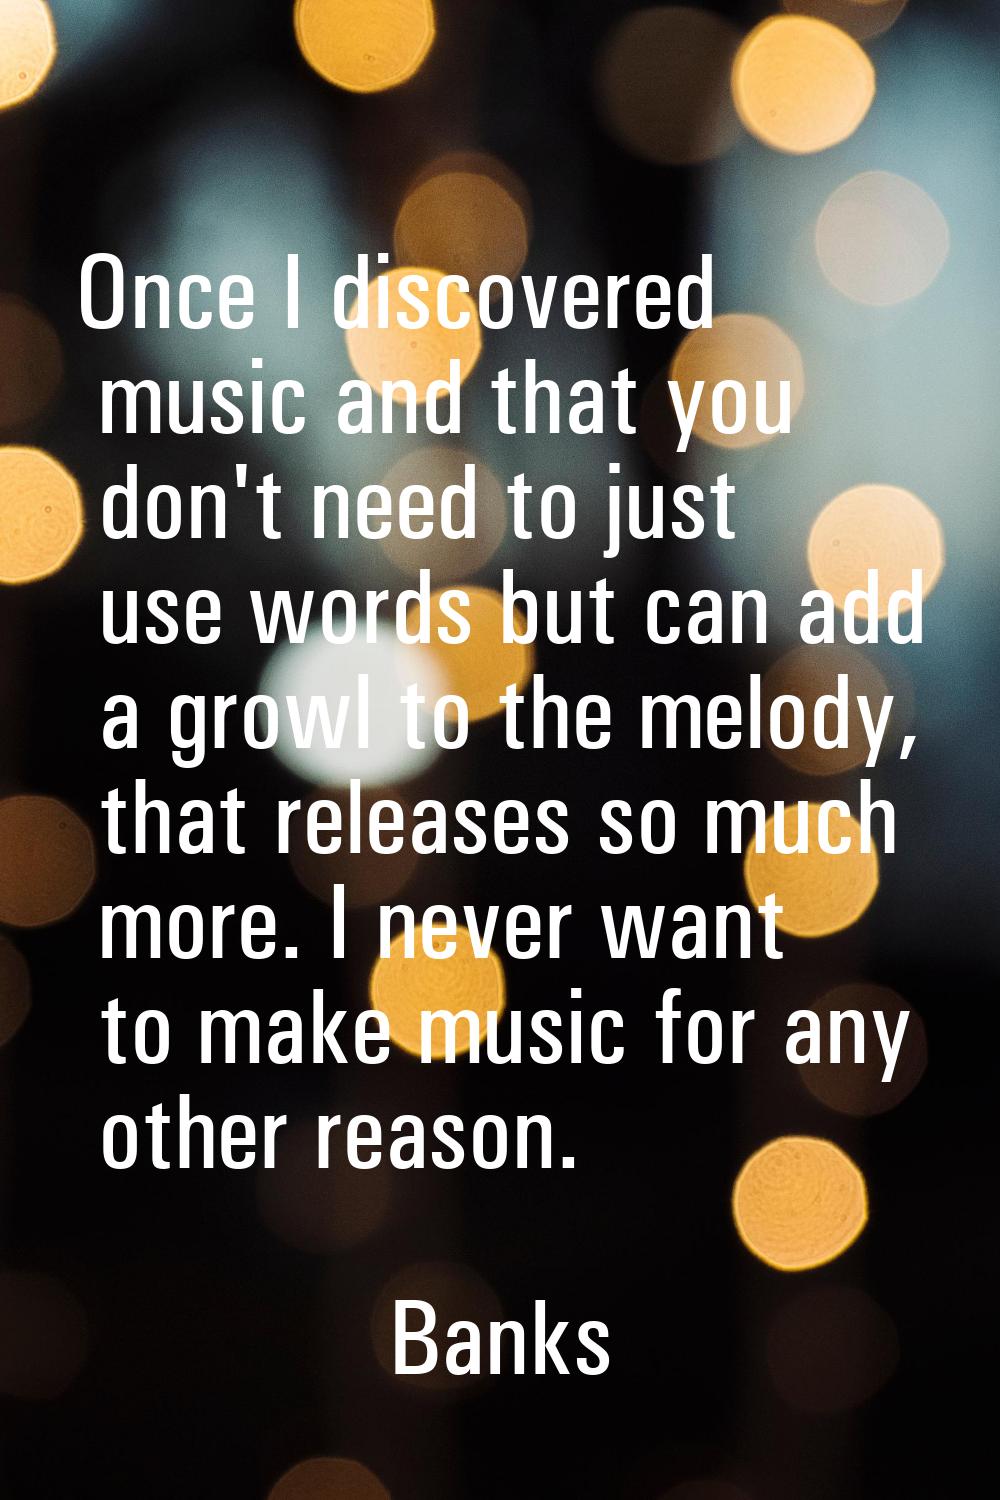 Once I discovered music and that you don't need to just use words but can add a growl to the melody